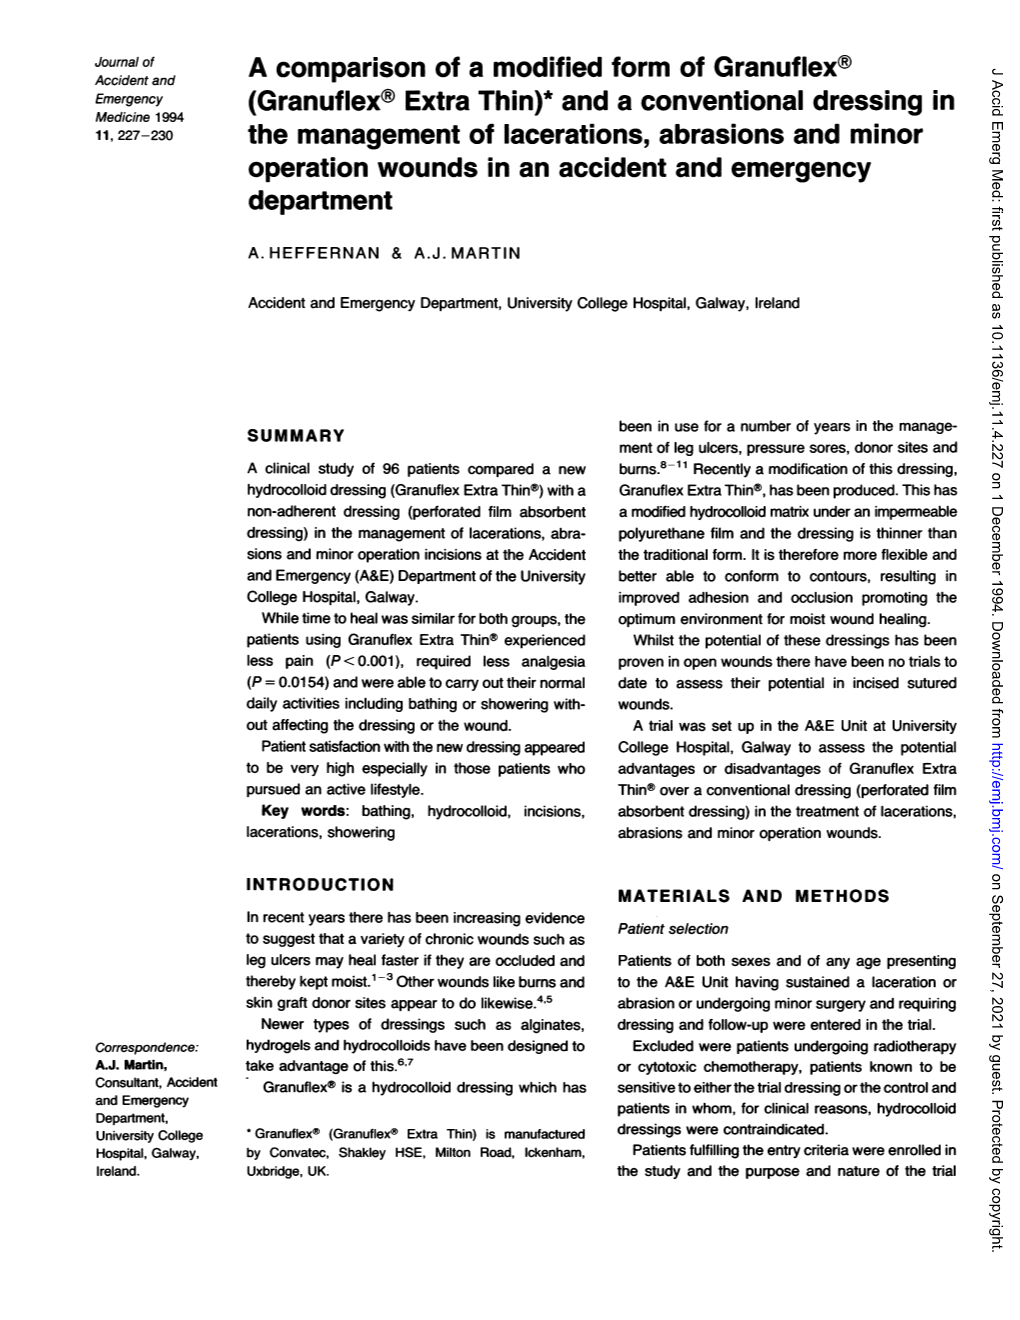 The Management of Lacerations, Abrasions and Minor Operation Wounds in an Accident and Emergency Department